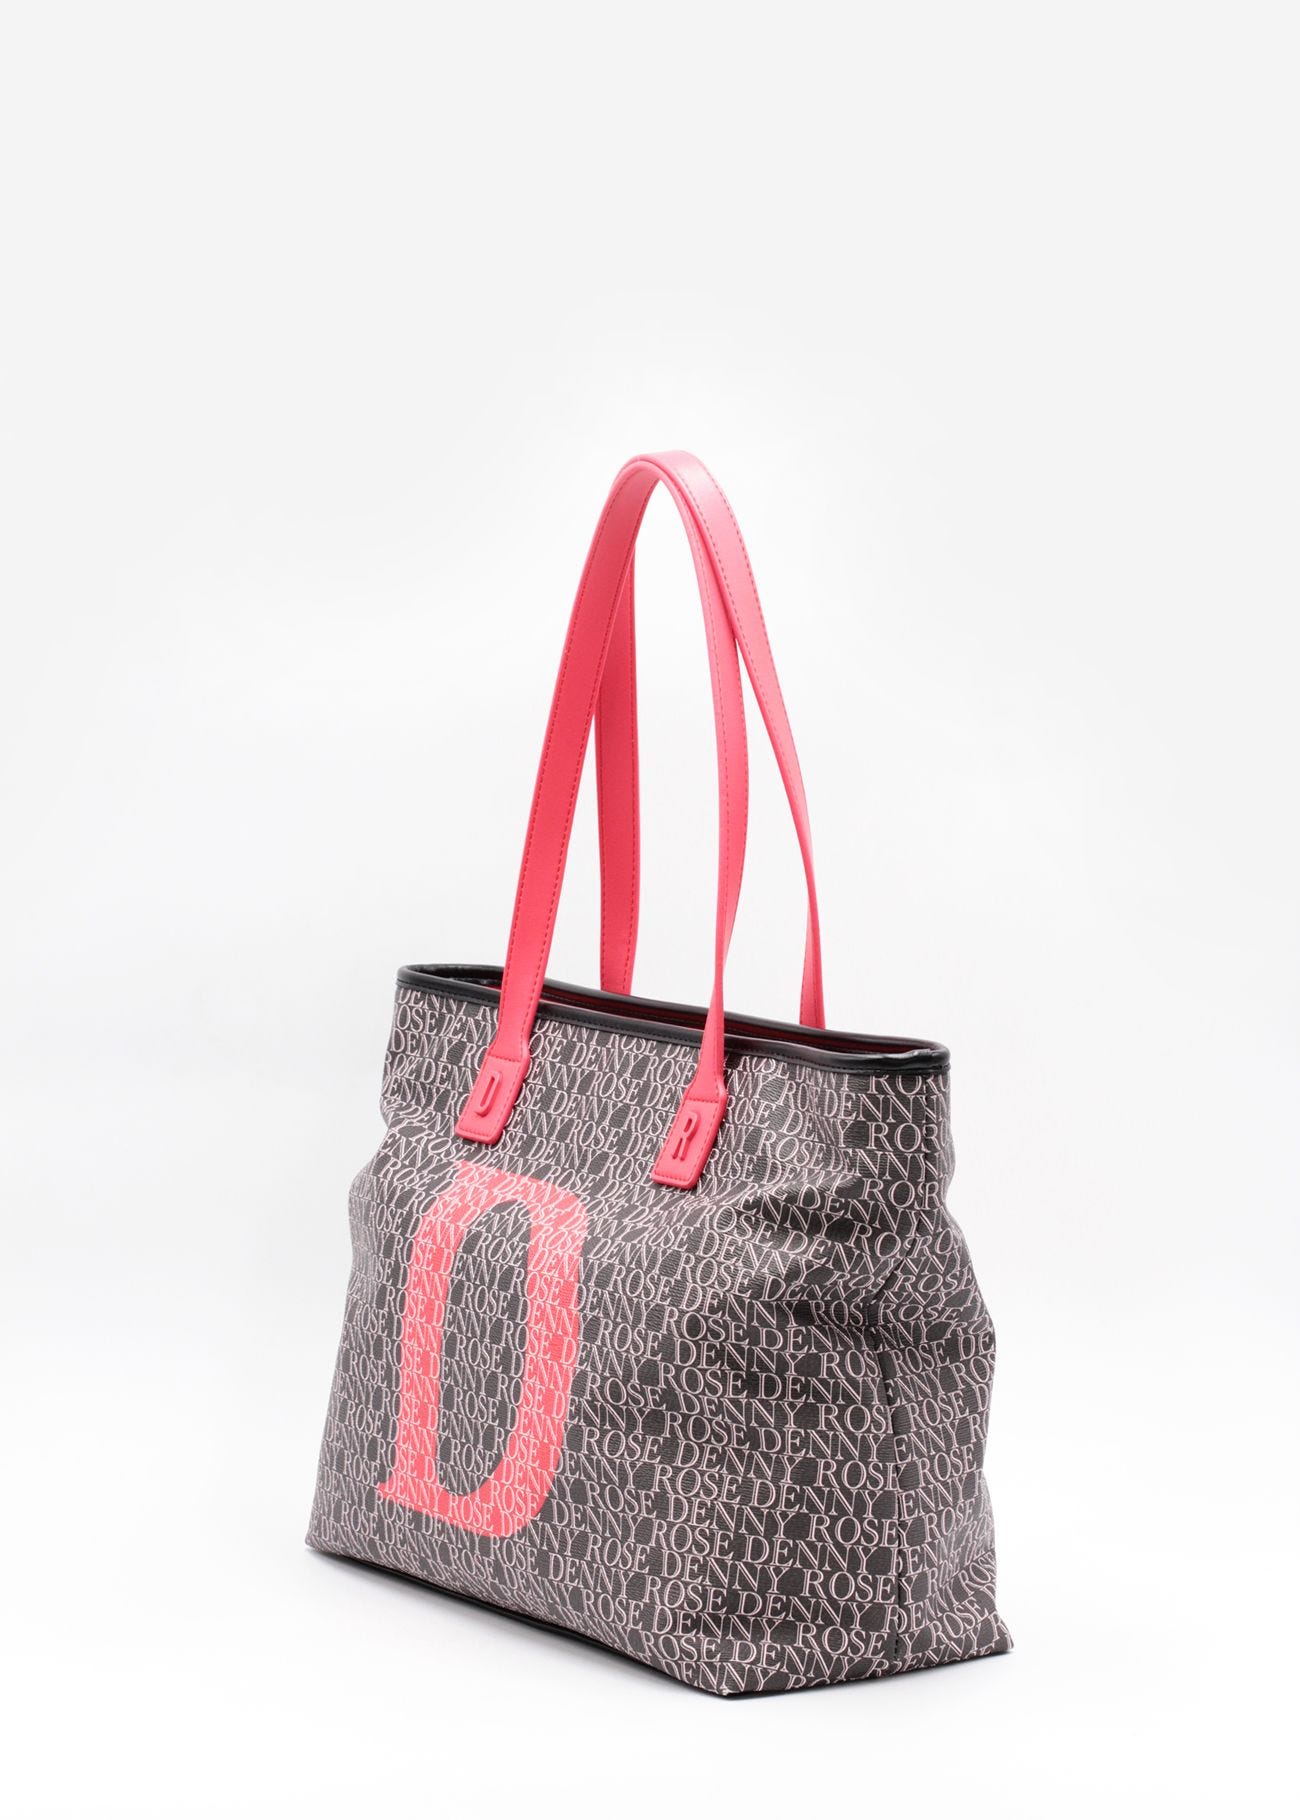 Shopping bag con stampa all over